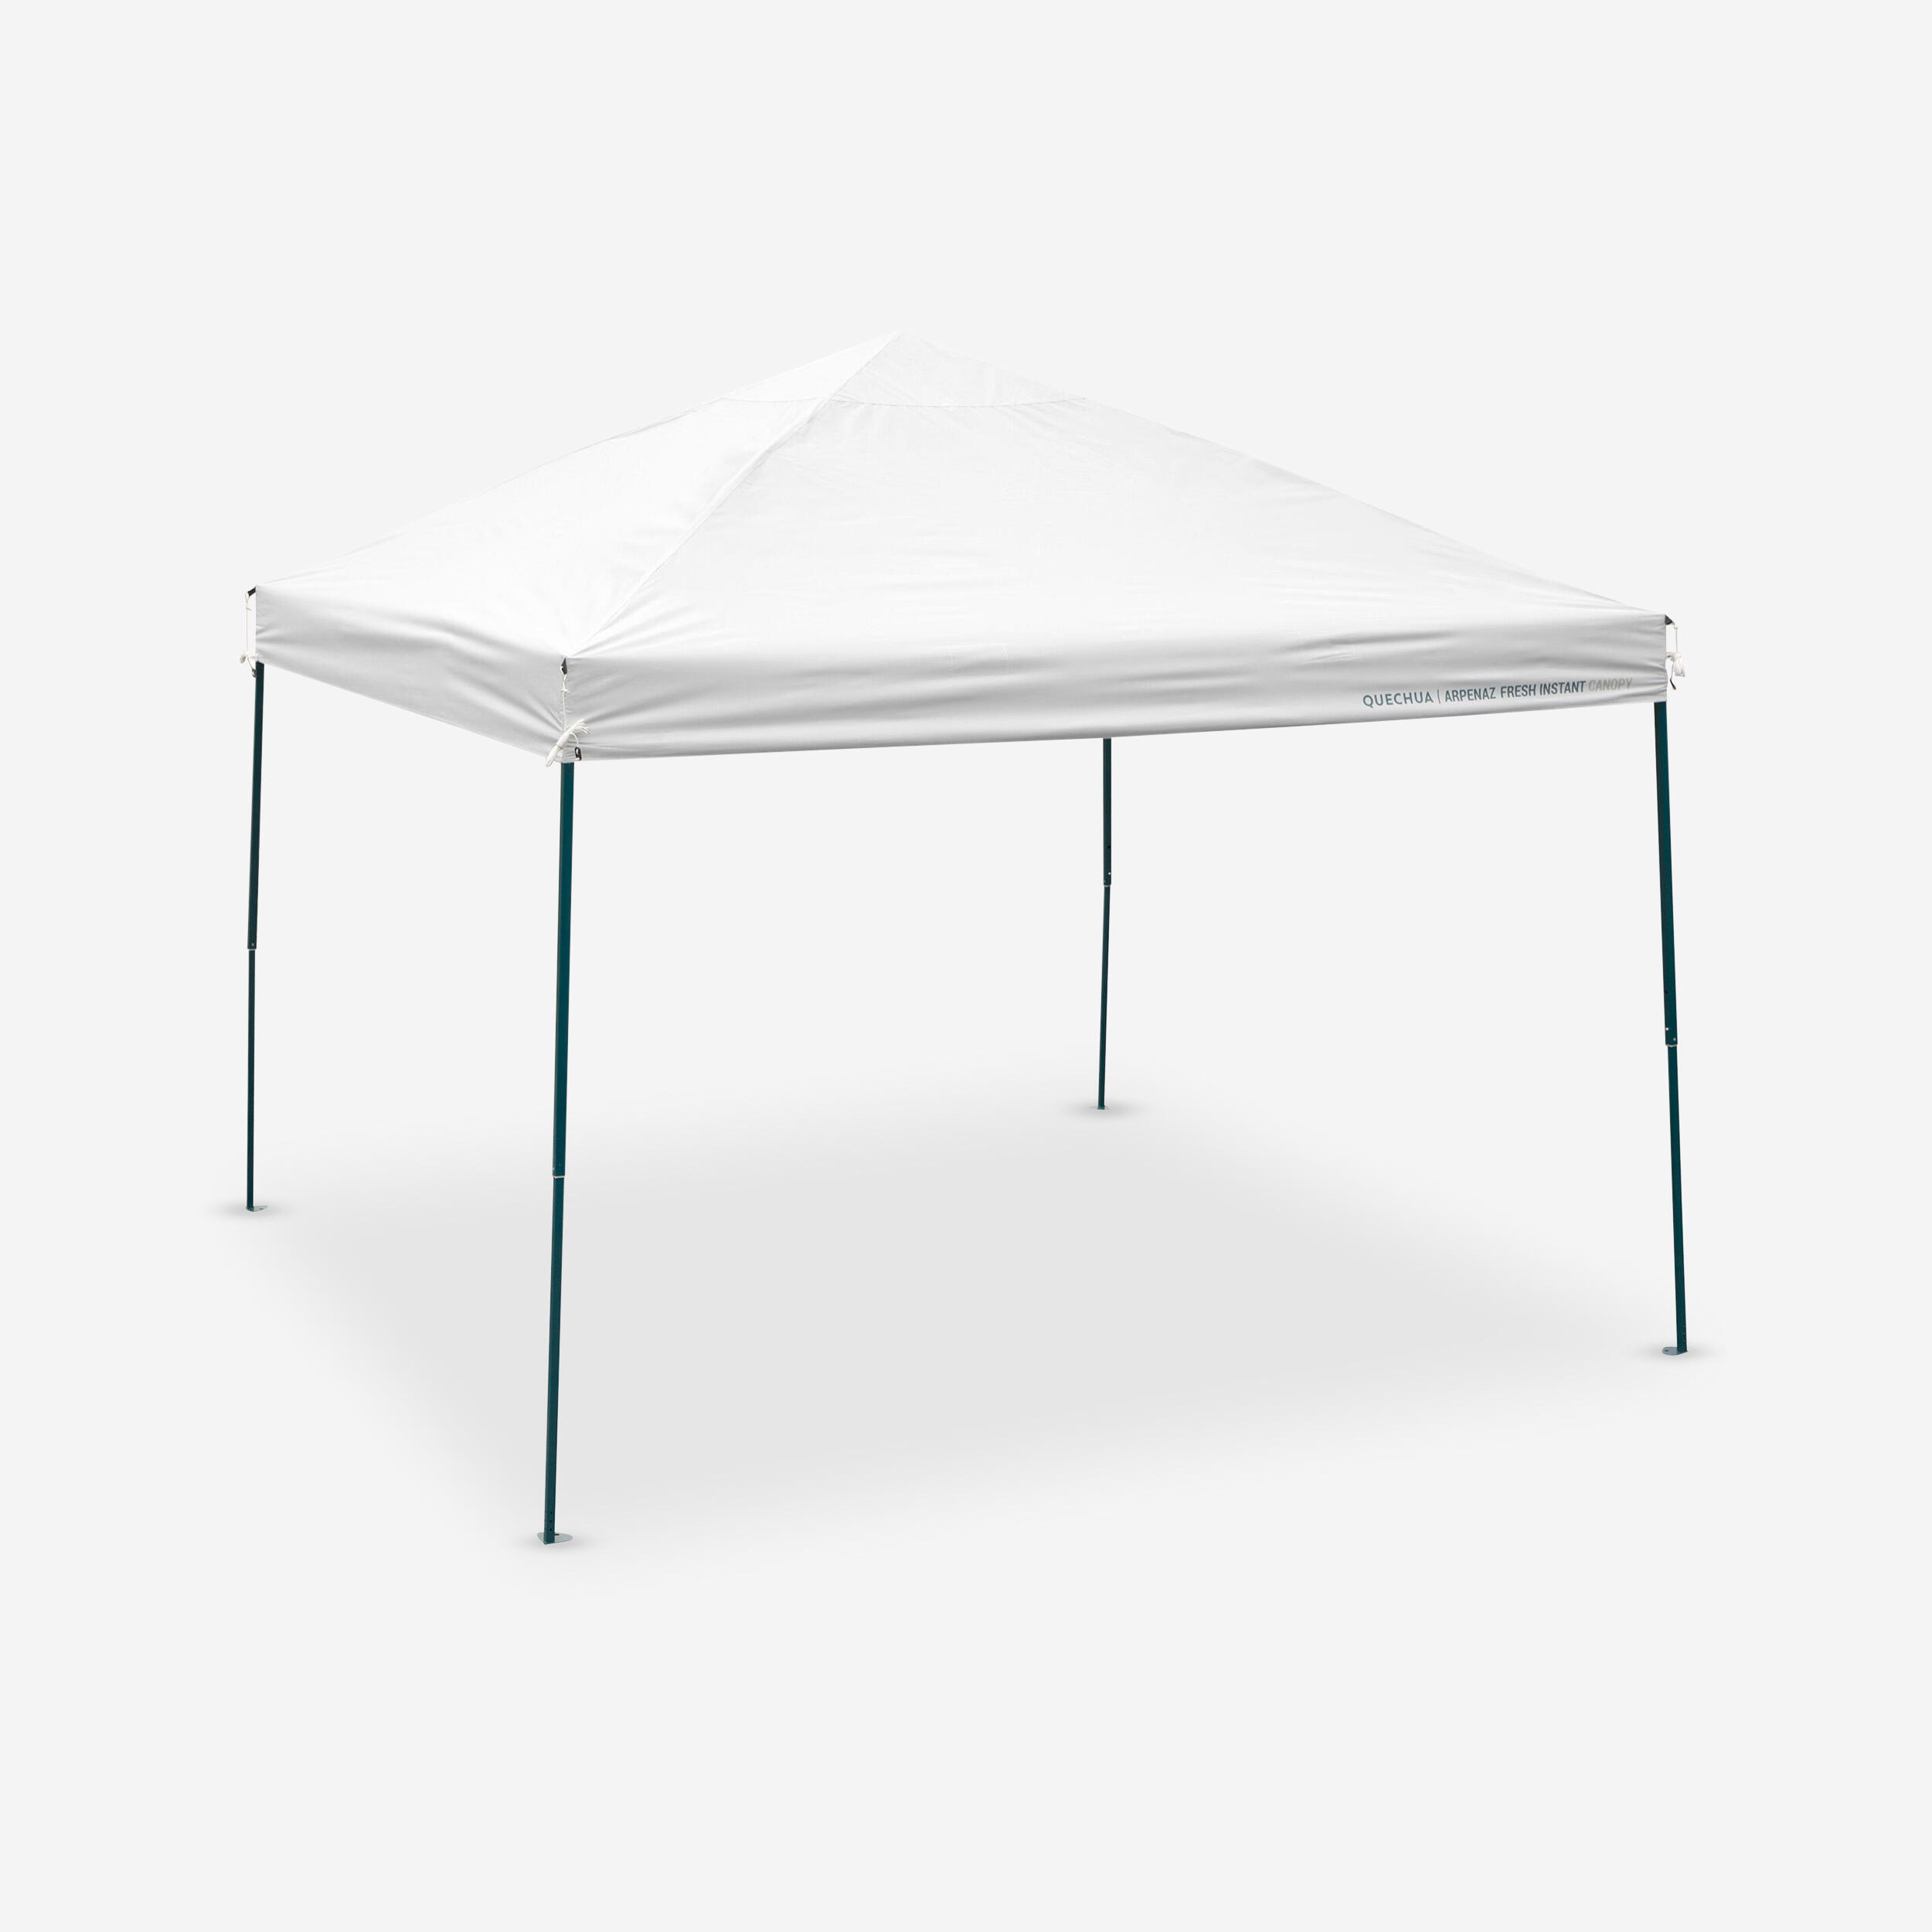 Adapost De Camping Tip Pavilion Arpenaz Fresh Instant Canopy 8 Persoane